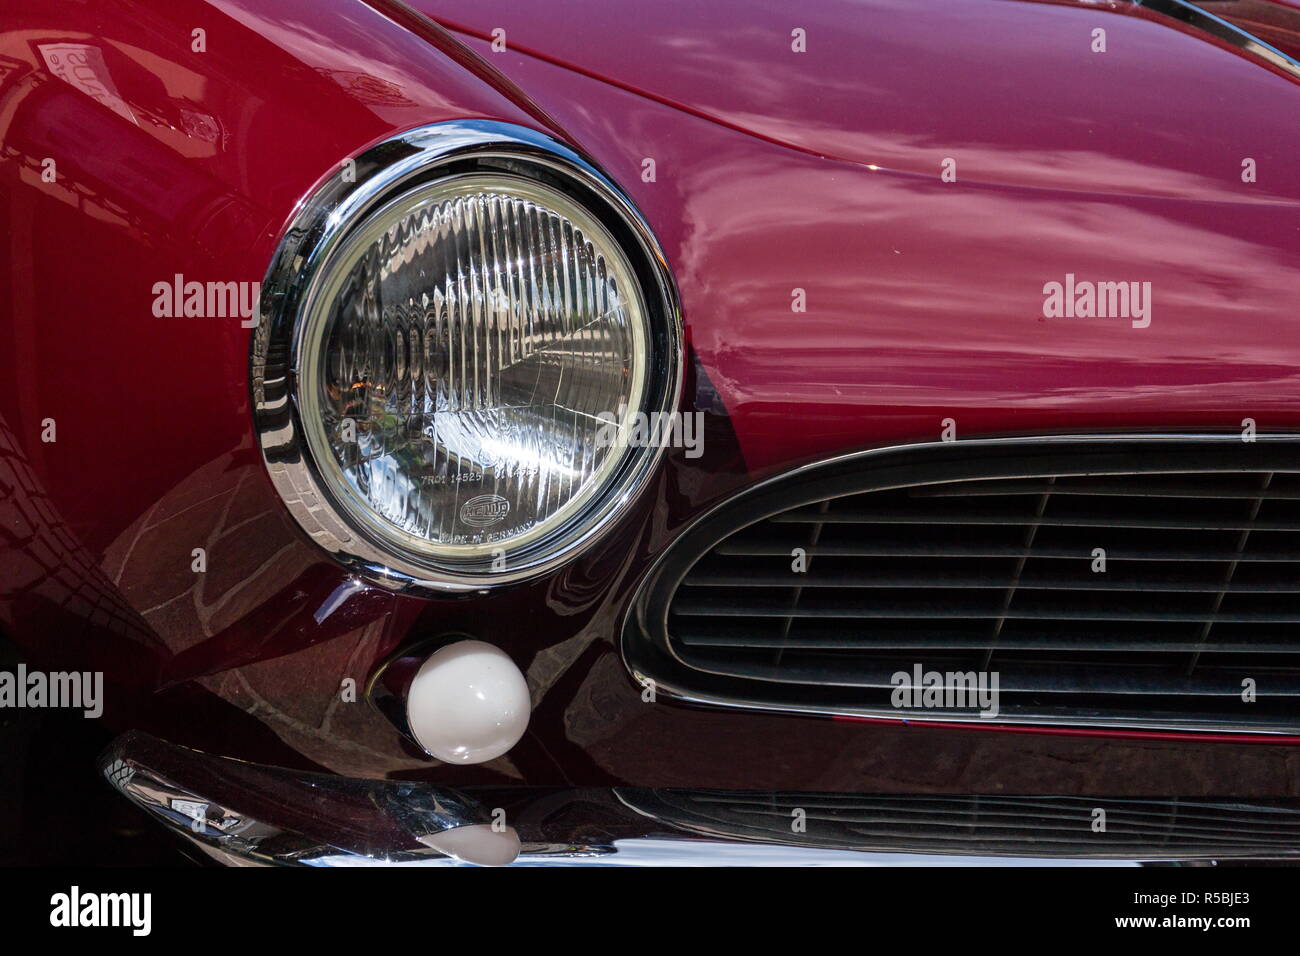 SAALBACH-HINTERGLEMM, AUSTRIA - JUNE 21 2018: Vintage car BMW 507 roadster oldsmobile veteran produced from 1956 to 1959 on June 21, 2018 Stock Photo